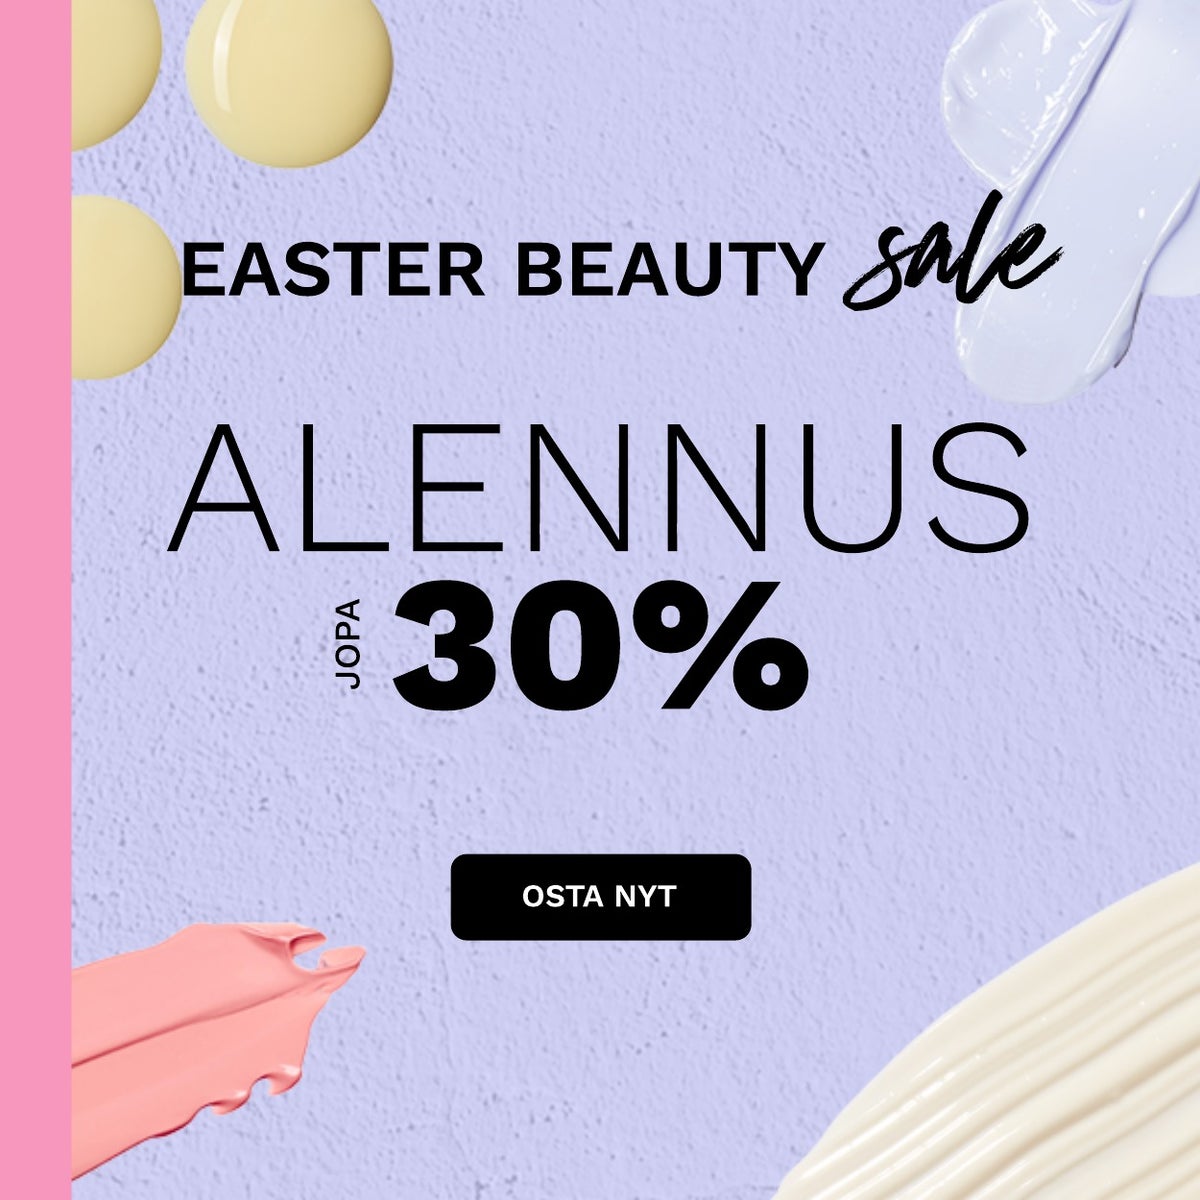 shop up to 25% off easter offers